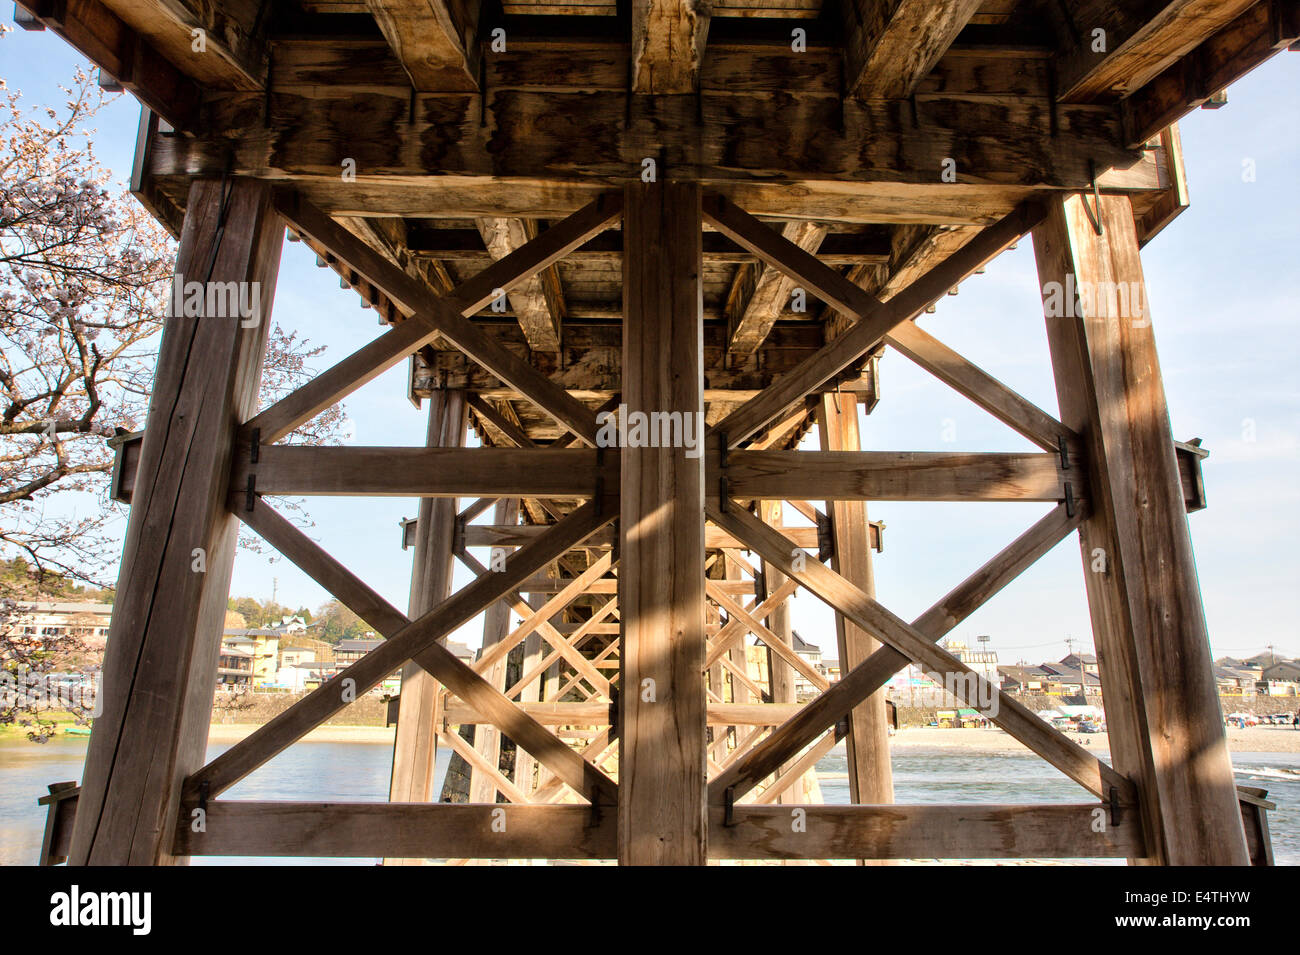 The historical wooden arch Kintai bridge spanning the Nishiki River at Iwakuni in Japan. Underside of the bridge with it's wooden cross beam support. Stock Photo